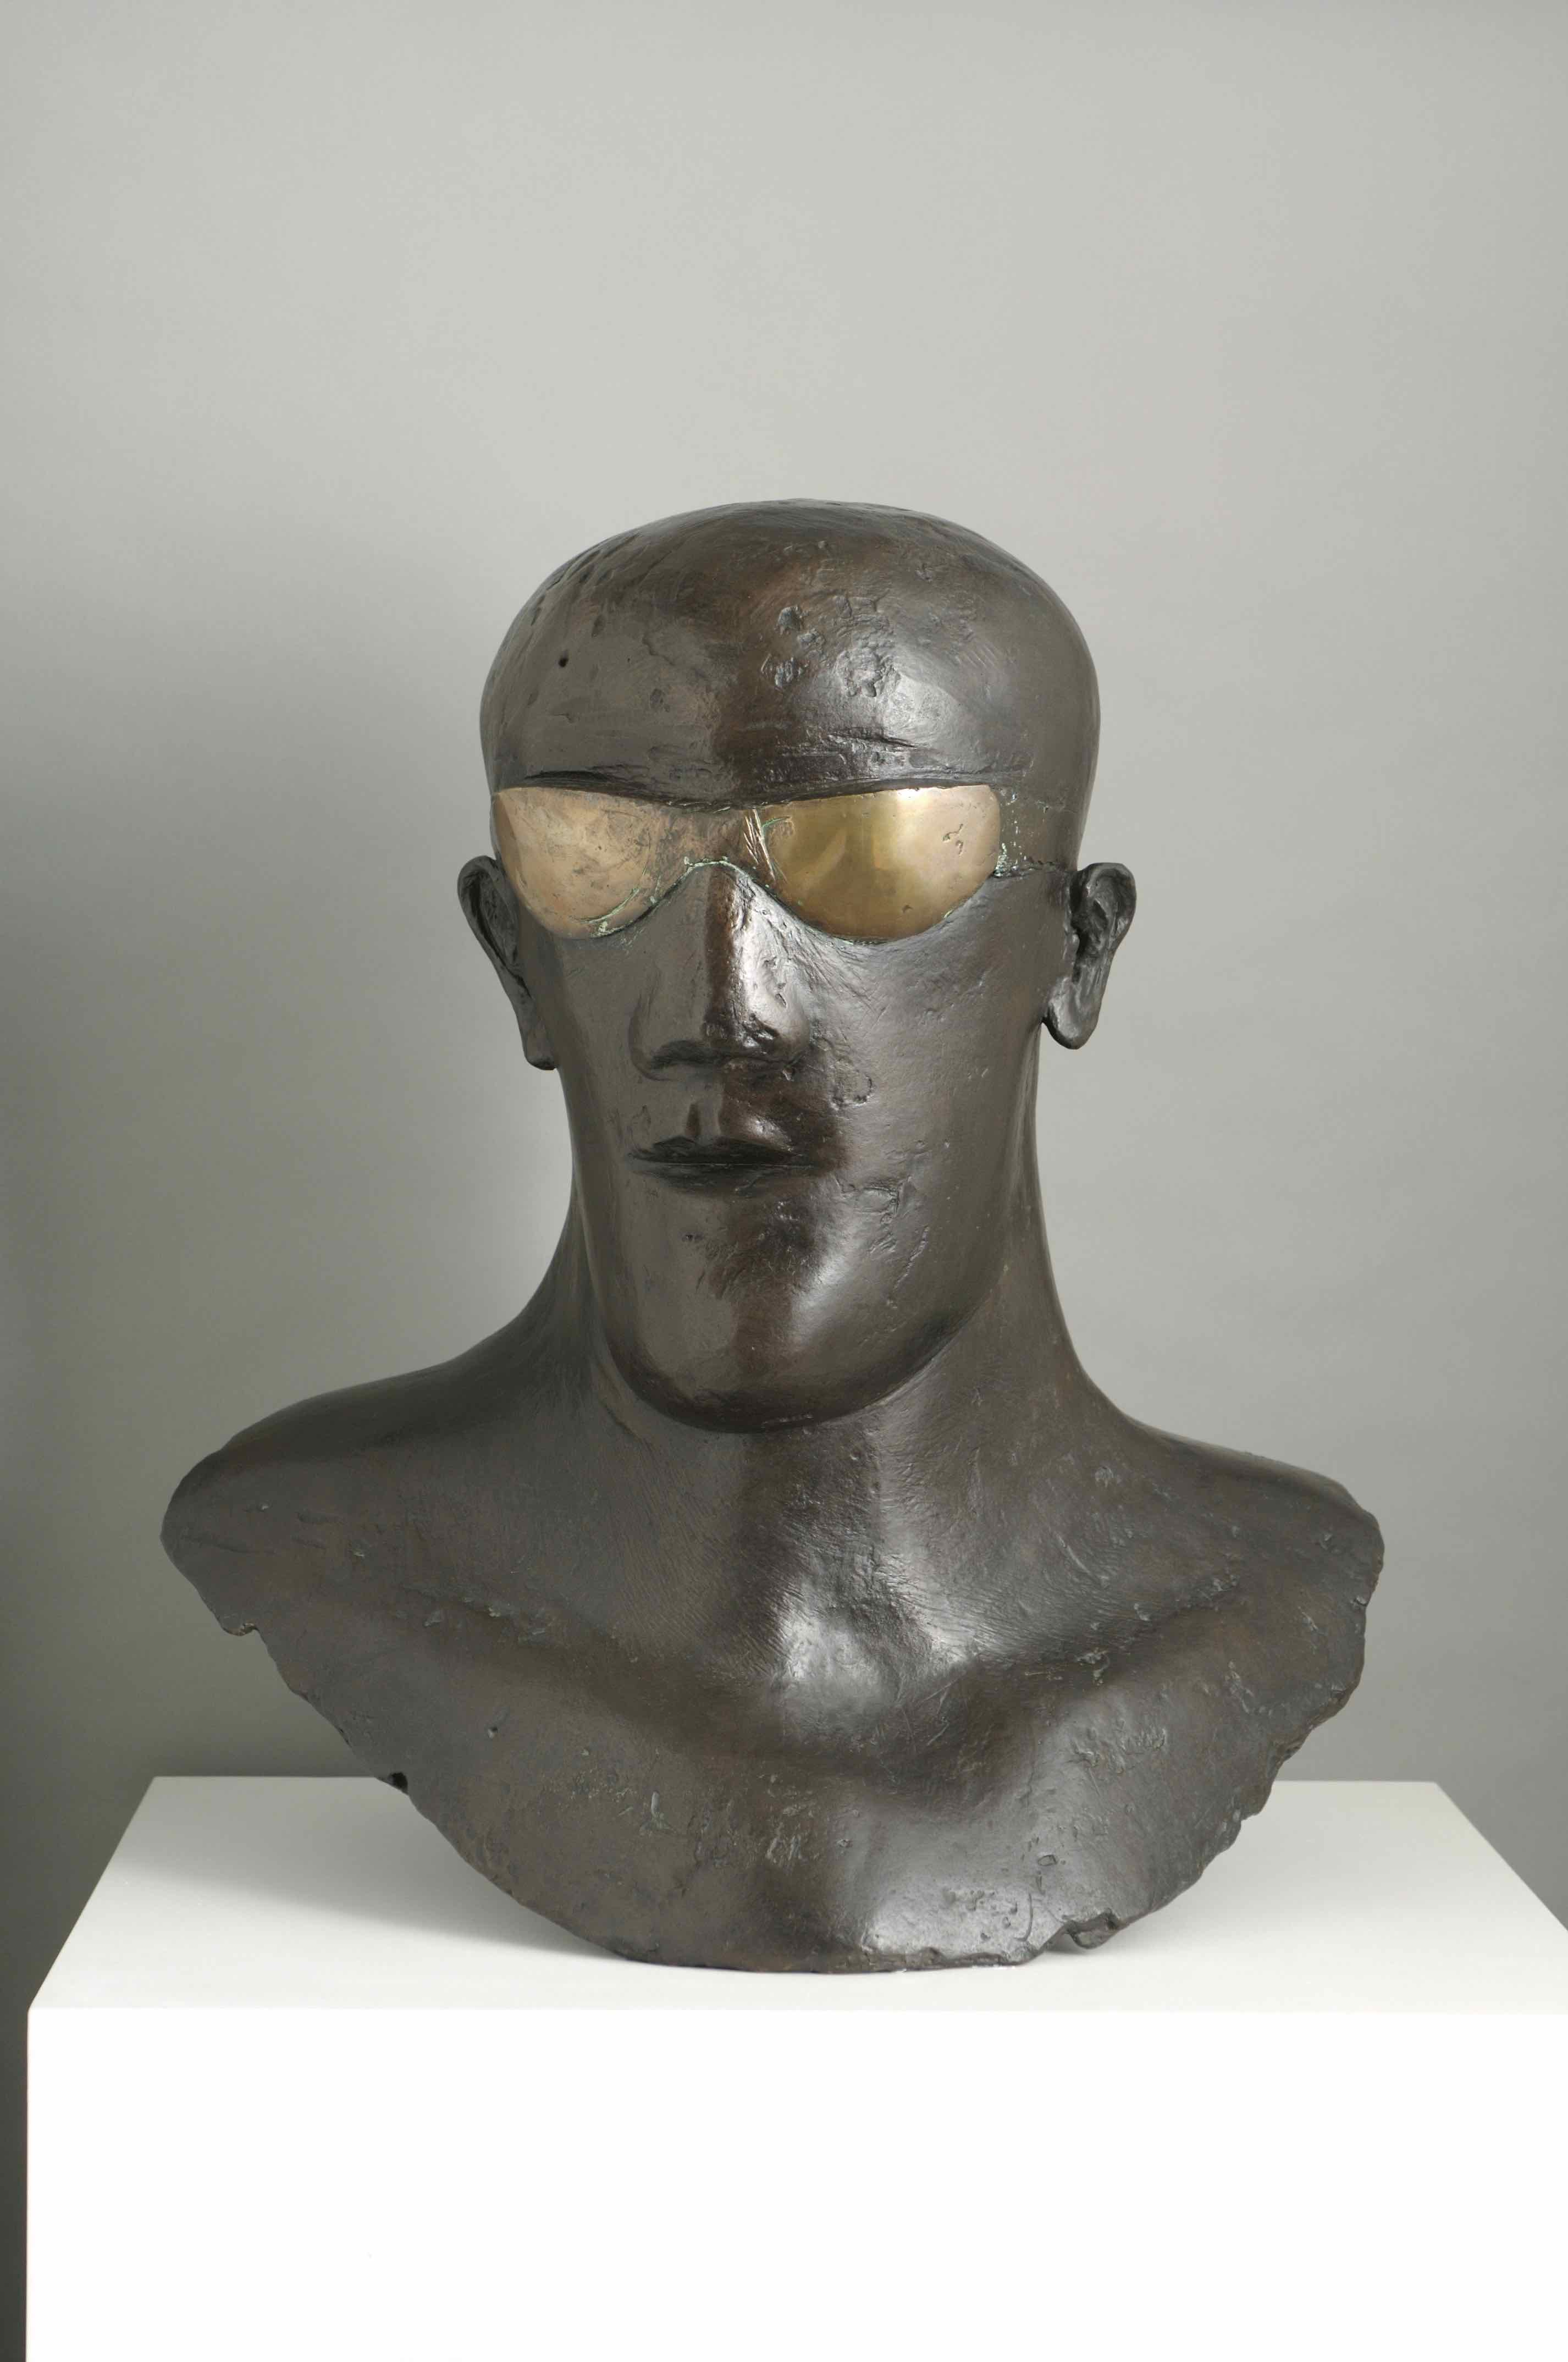 Elisabeth Frink-Goggle Head- © Frink Estate and Archive executors. Courtesy of The Ingram Collection, Image © JP Bland 2016. Fragility and Power at Abbot Hall Art Gallery, Kendal, Cumbria